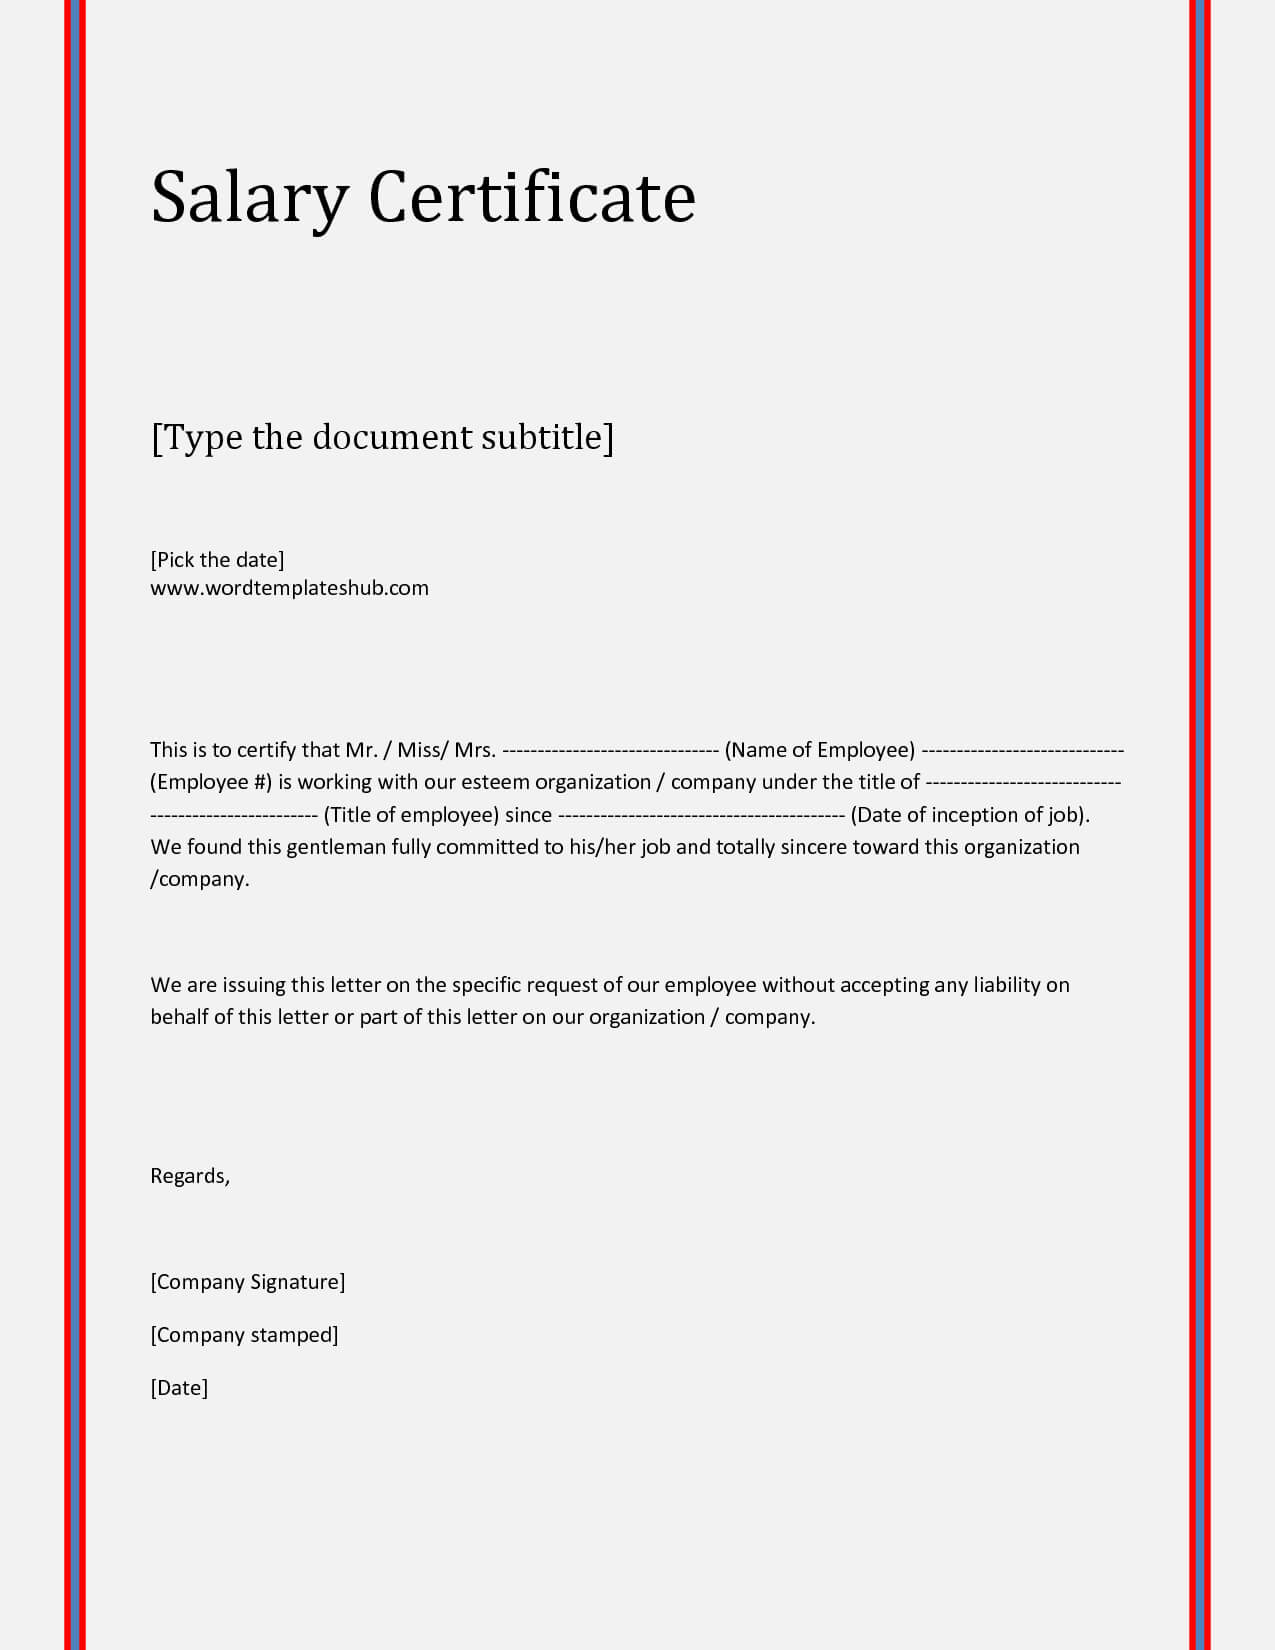 Request Letter For Certificate Employment Nurses Cover Proof Throughout Sample Certificate Employment Template